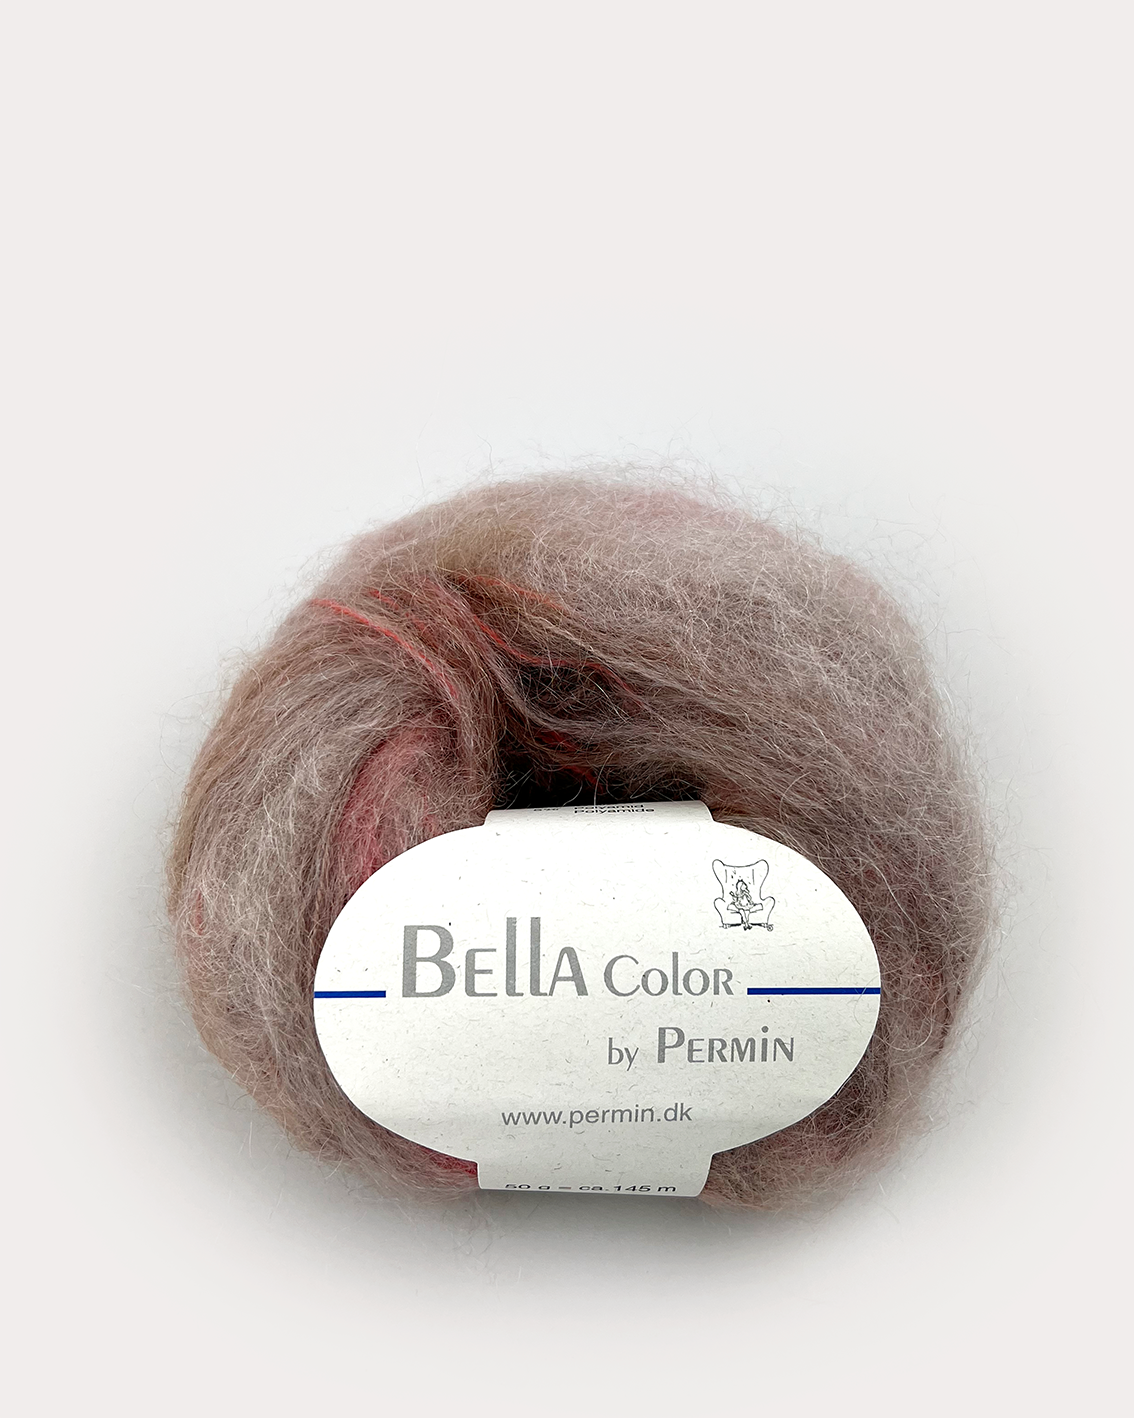 BELLA COLOR MOHAIR By Permin 883163 Beige/Rust